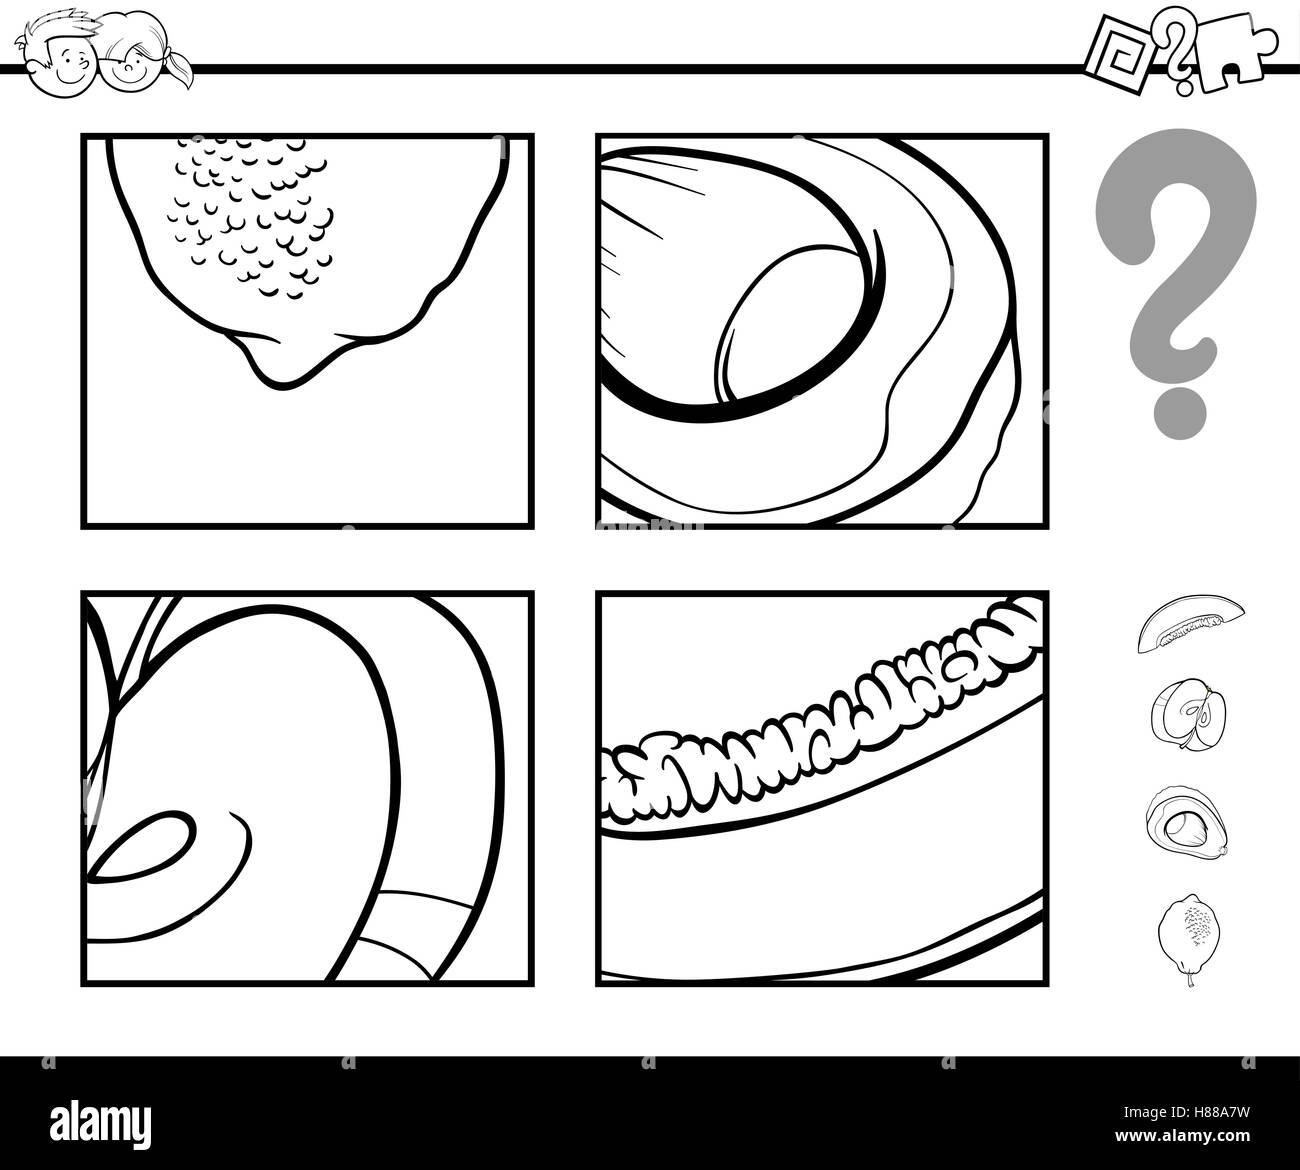 Black and White Cartoon Illustration of Educational Activity Task of Guessing Fruits for Children Coloring Page Stock Vector